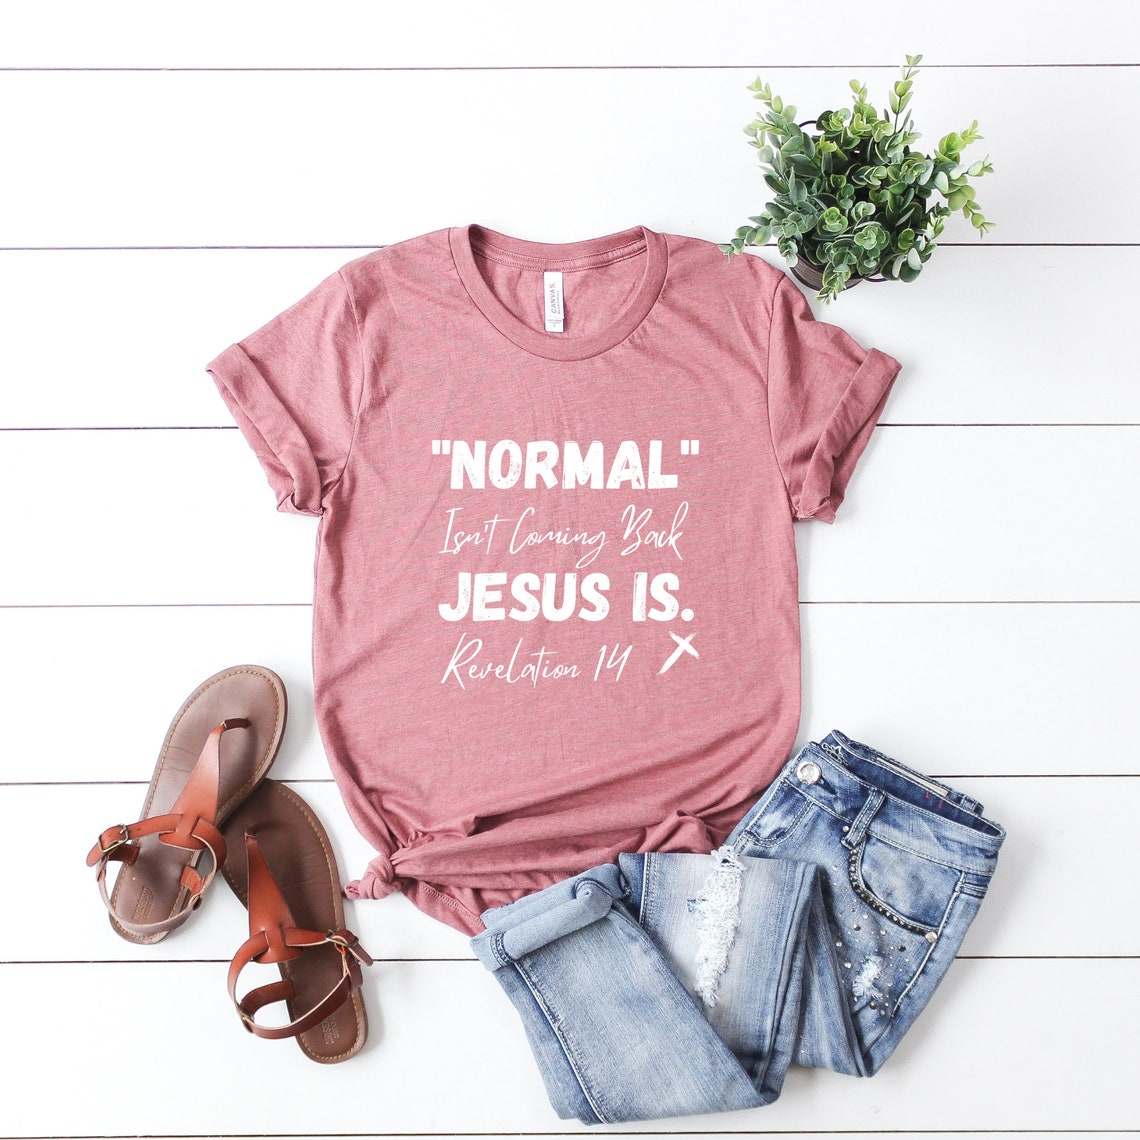 Normal Isn't Coming Back Jesus is Shirt Religious Shirt | Etsy